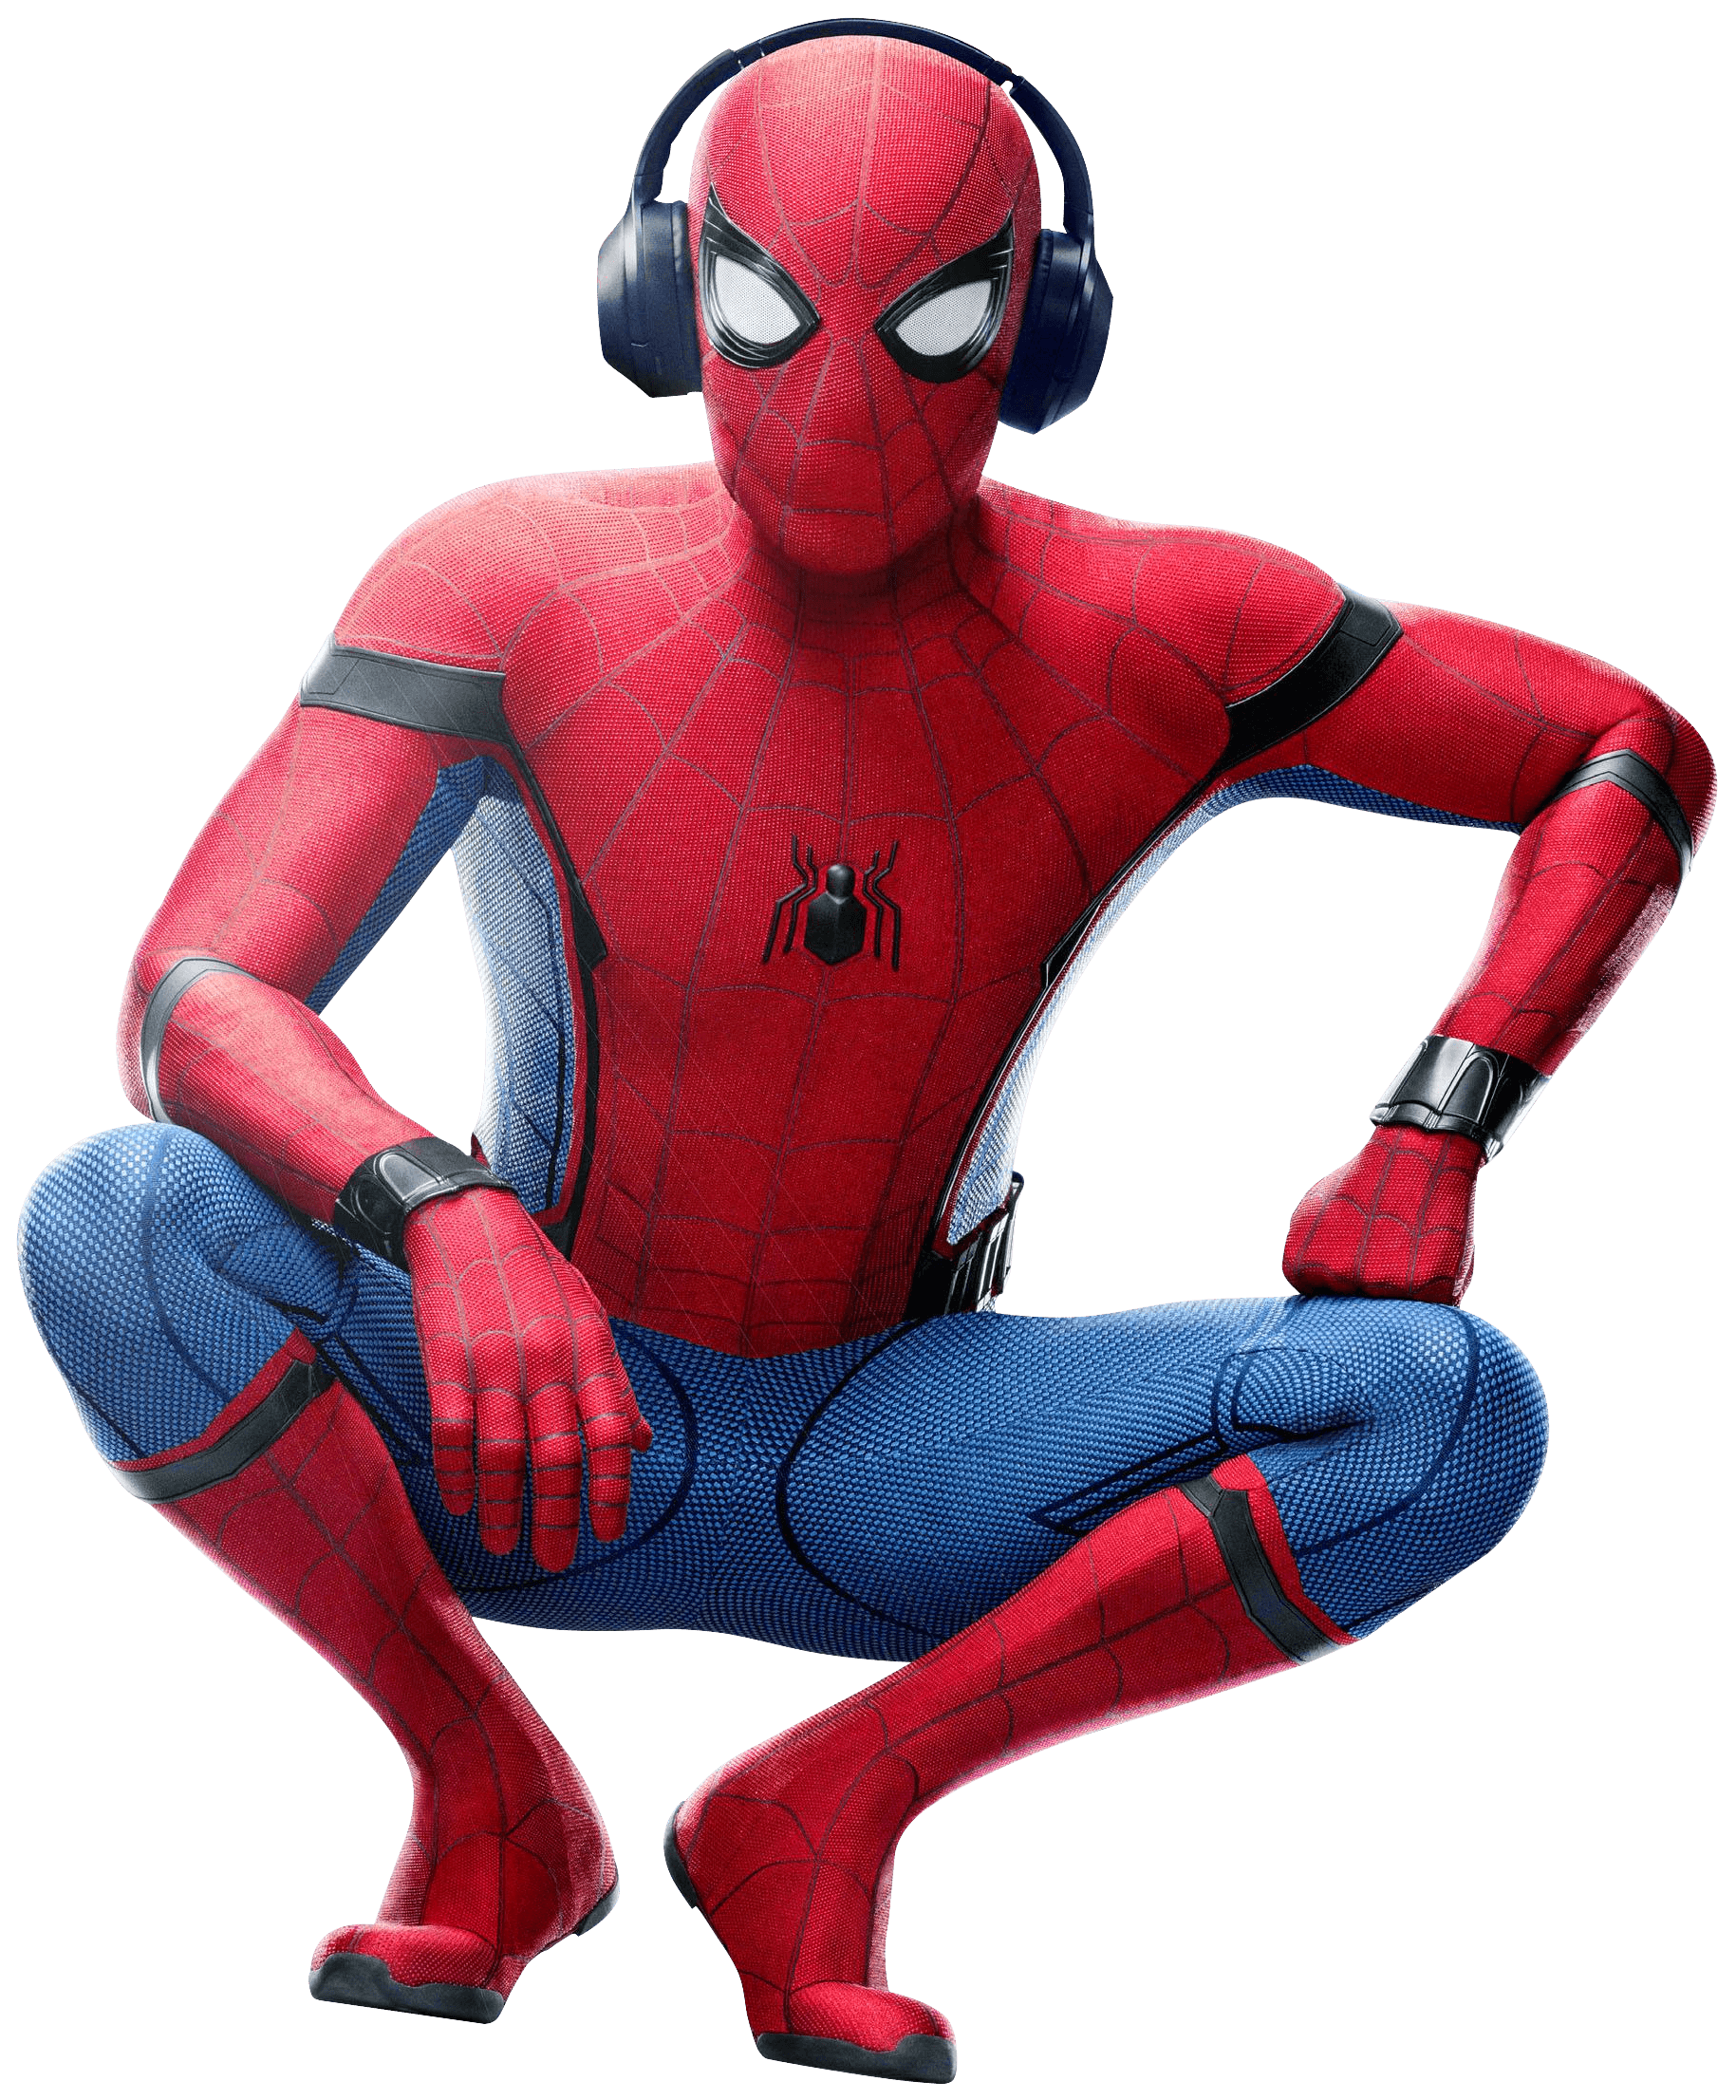 Spiderman squatting with headphones. Spiderman, Spider, Homecoming